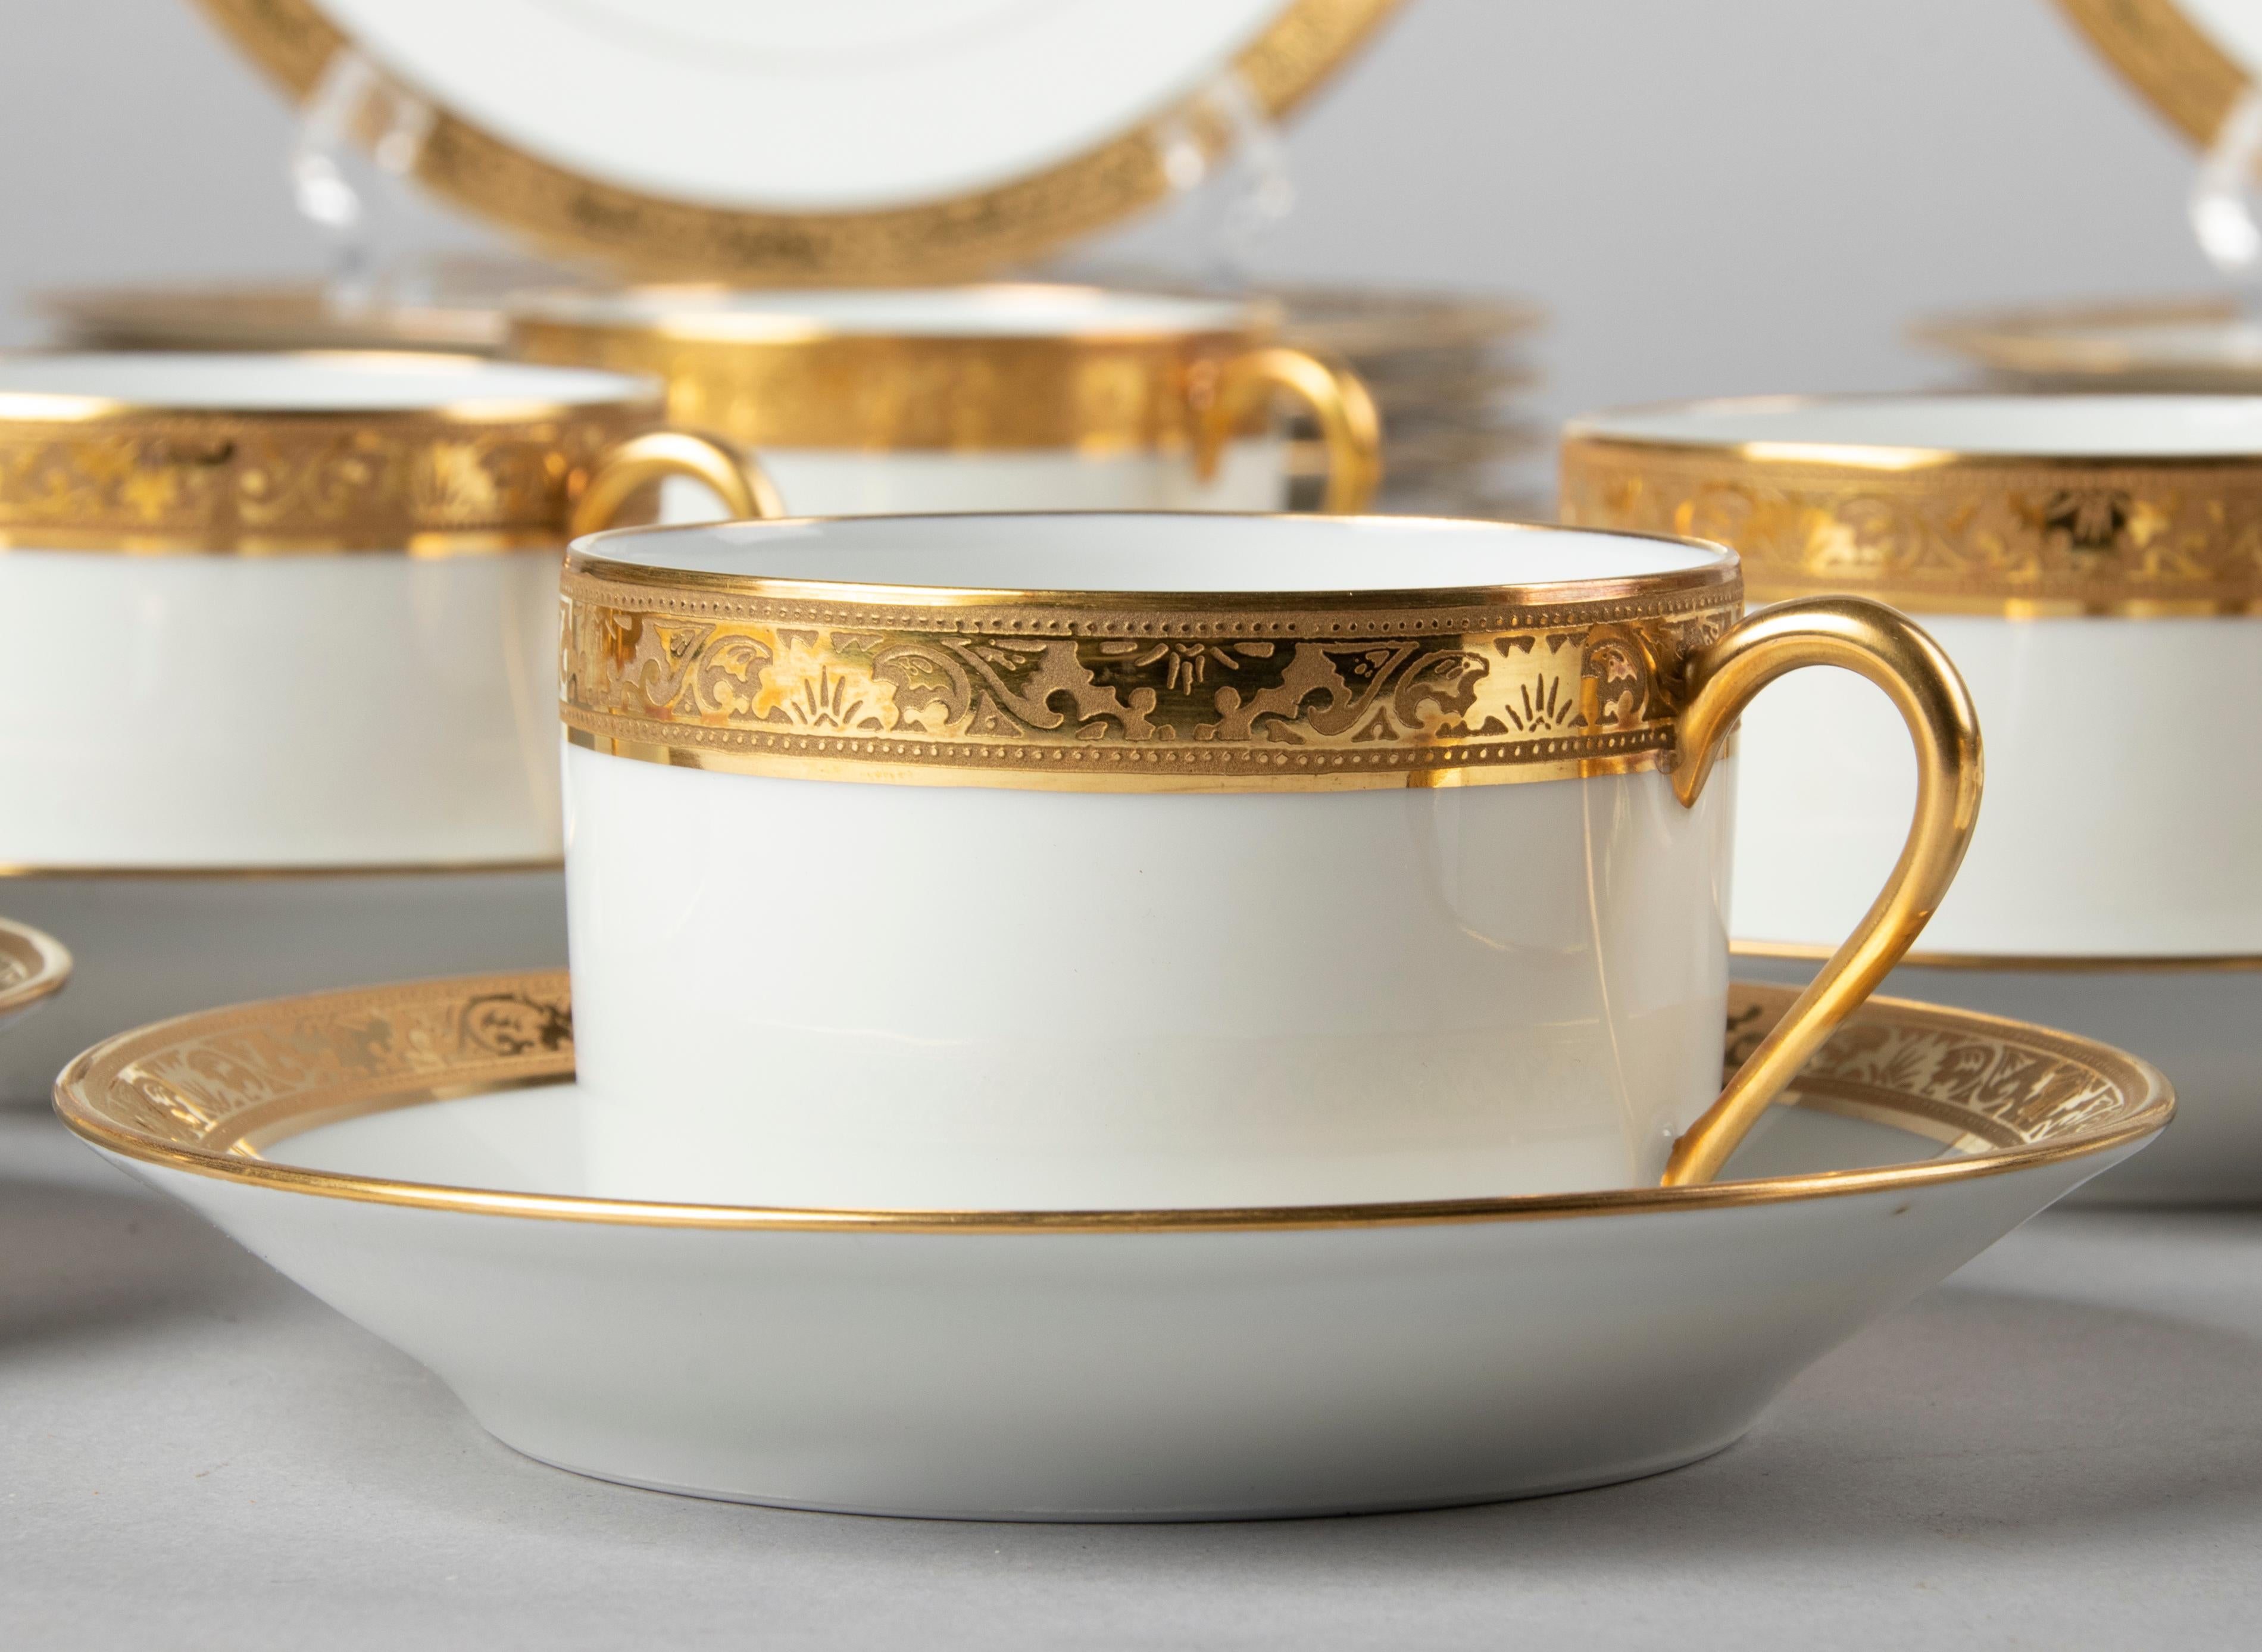 Empire Set of 12 Porcelain Tea Trios by Raynaud Limoges